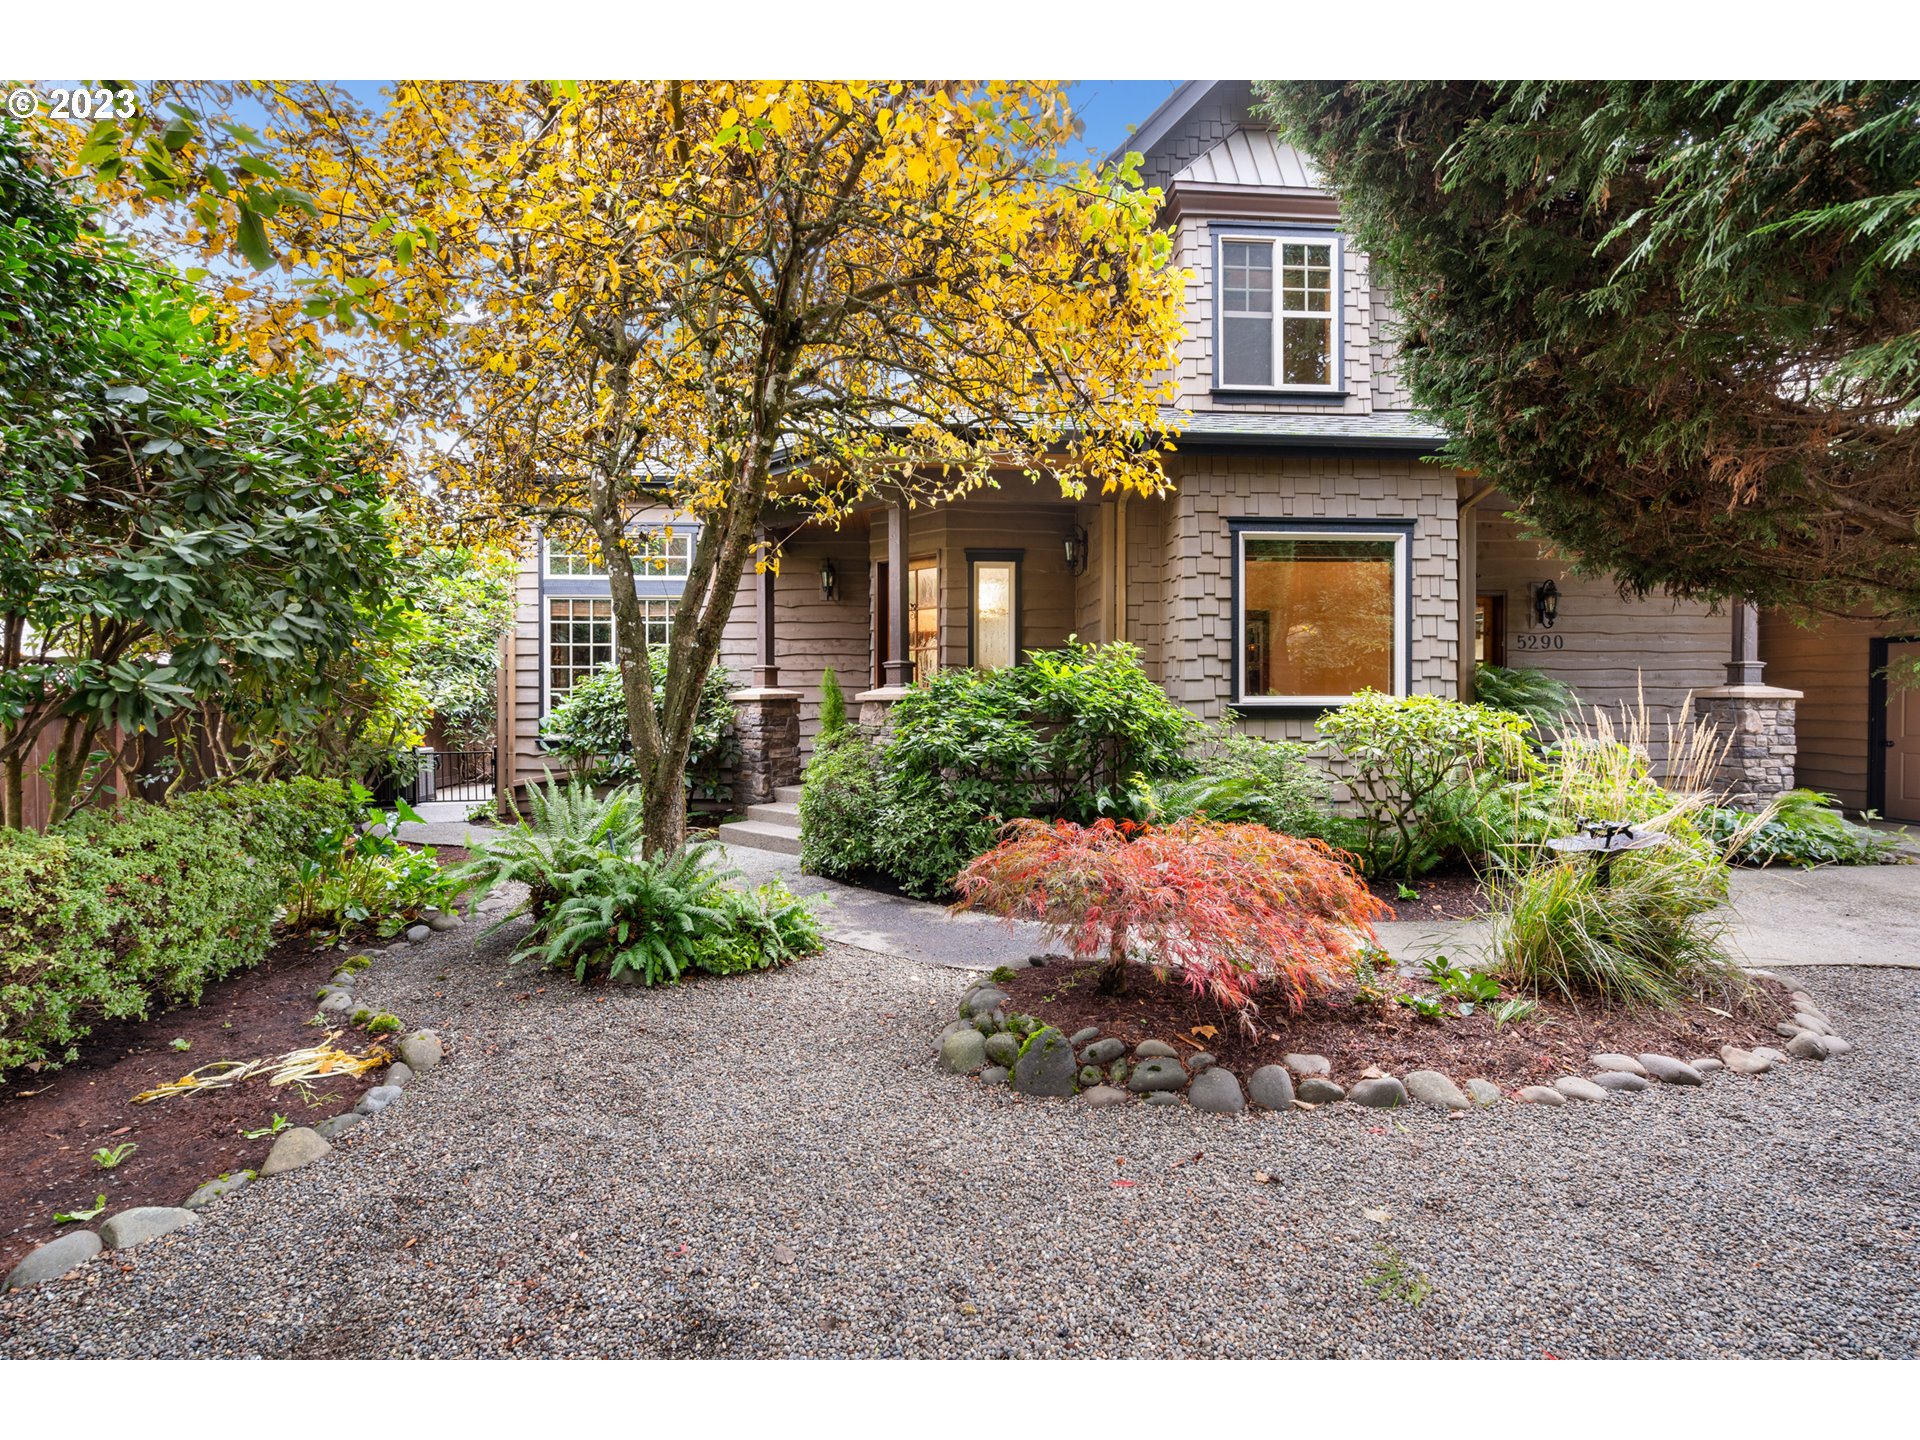 5290 SW CHILDS RD, Lake Oswego, OR 